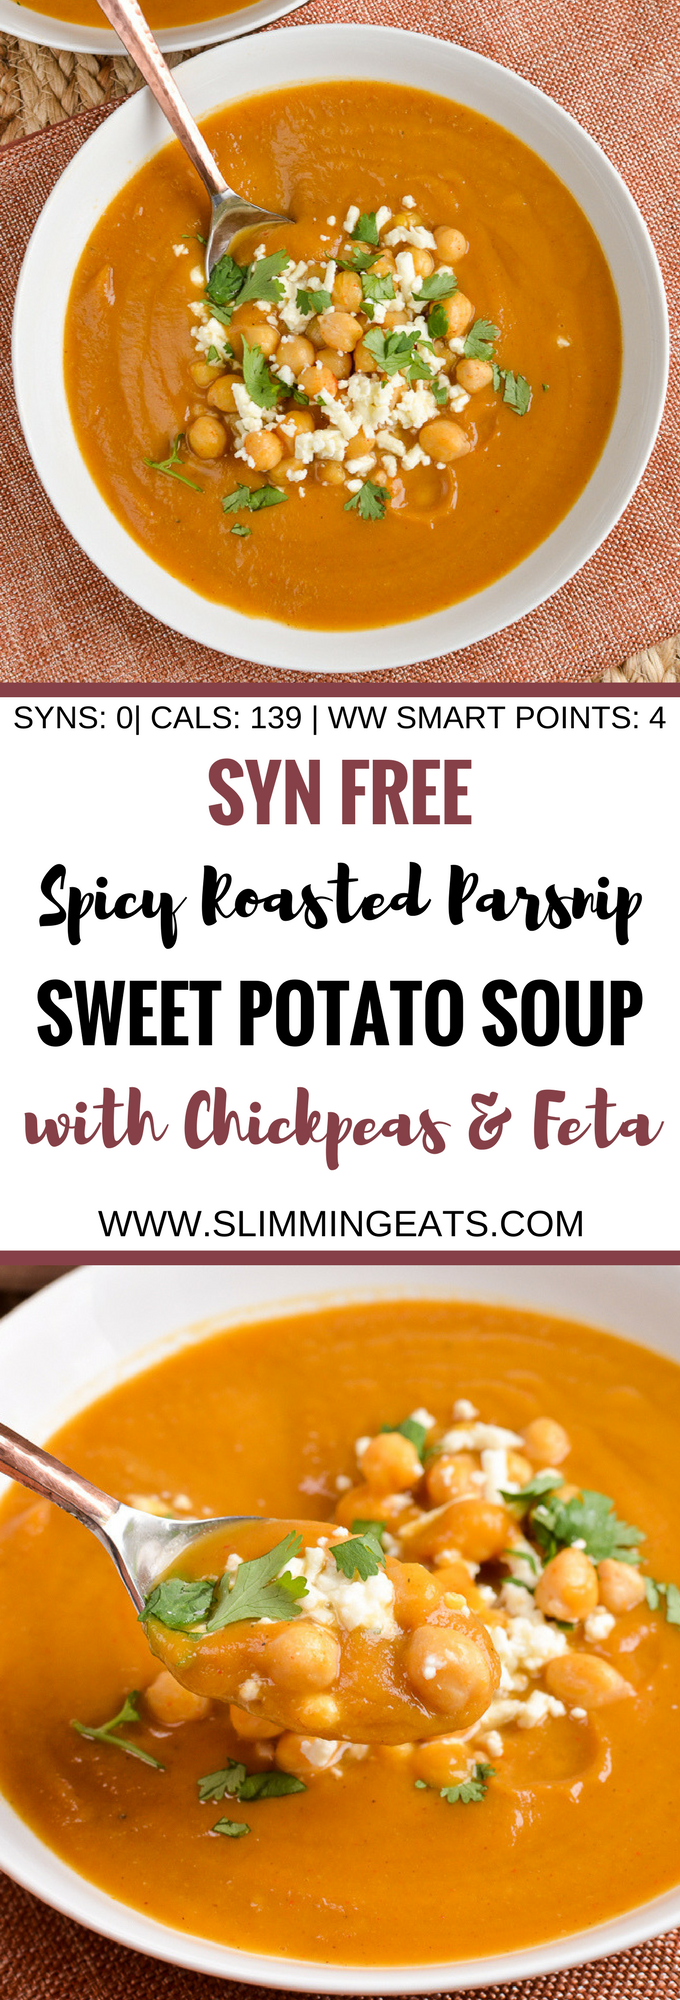 Slimming Eats Syn Free Spicy Roasted Parsnip and Sweet Potato Soup - gluten free, vegetarian, Slimming World and Weight Watchers friendly